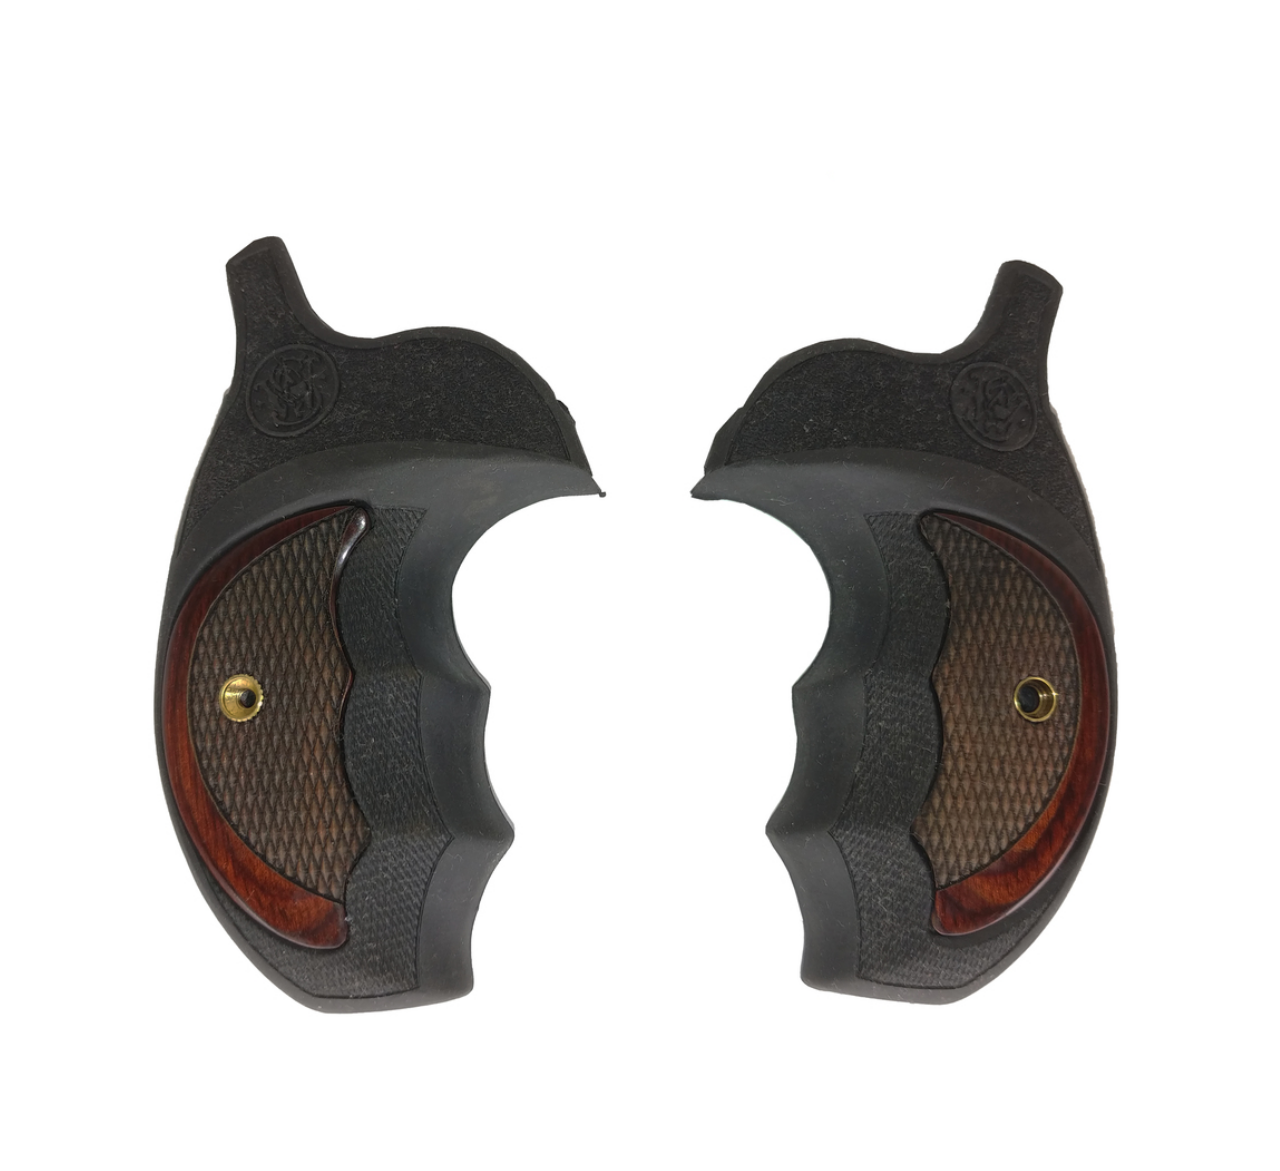 Altamont S&W K/L Frame Round Butt FALCONIA Grips Checkered Superior Rosewood Insert